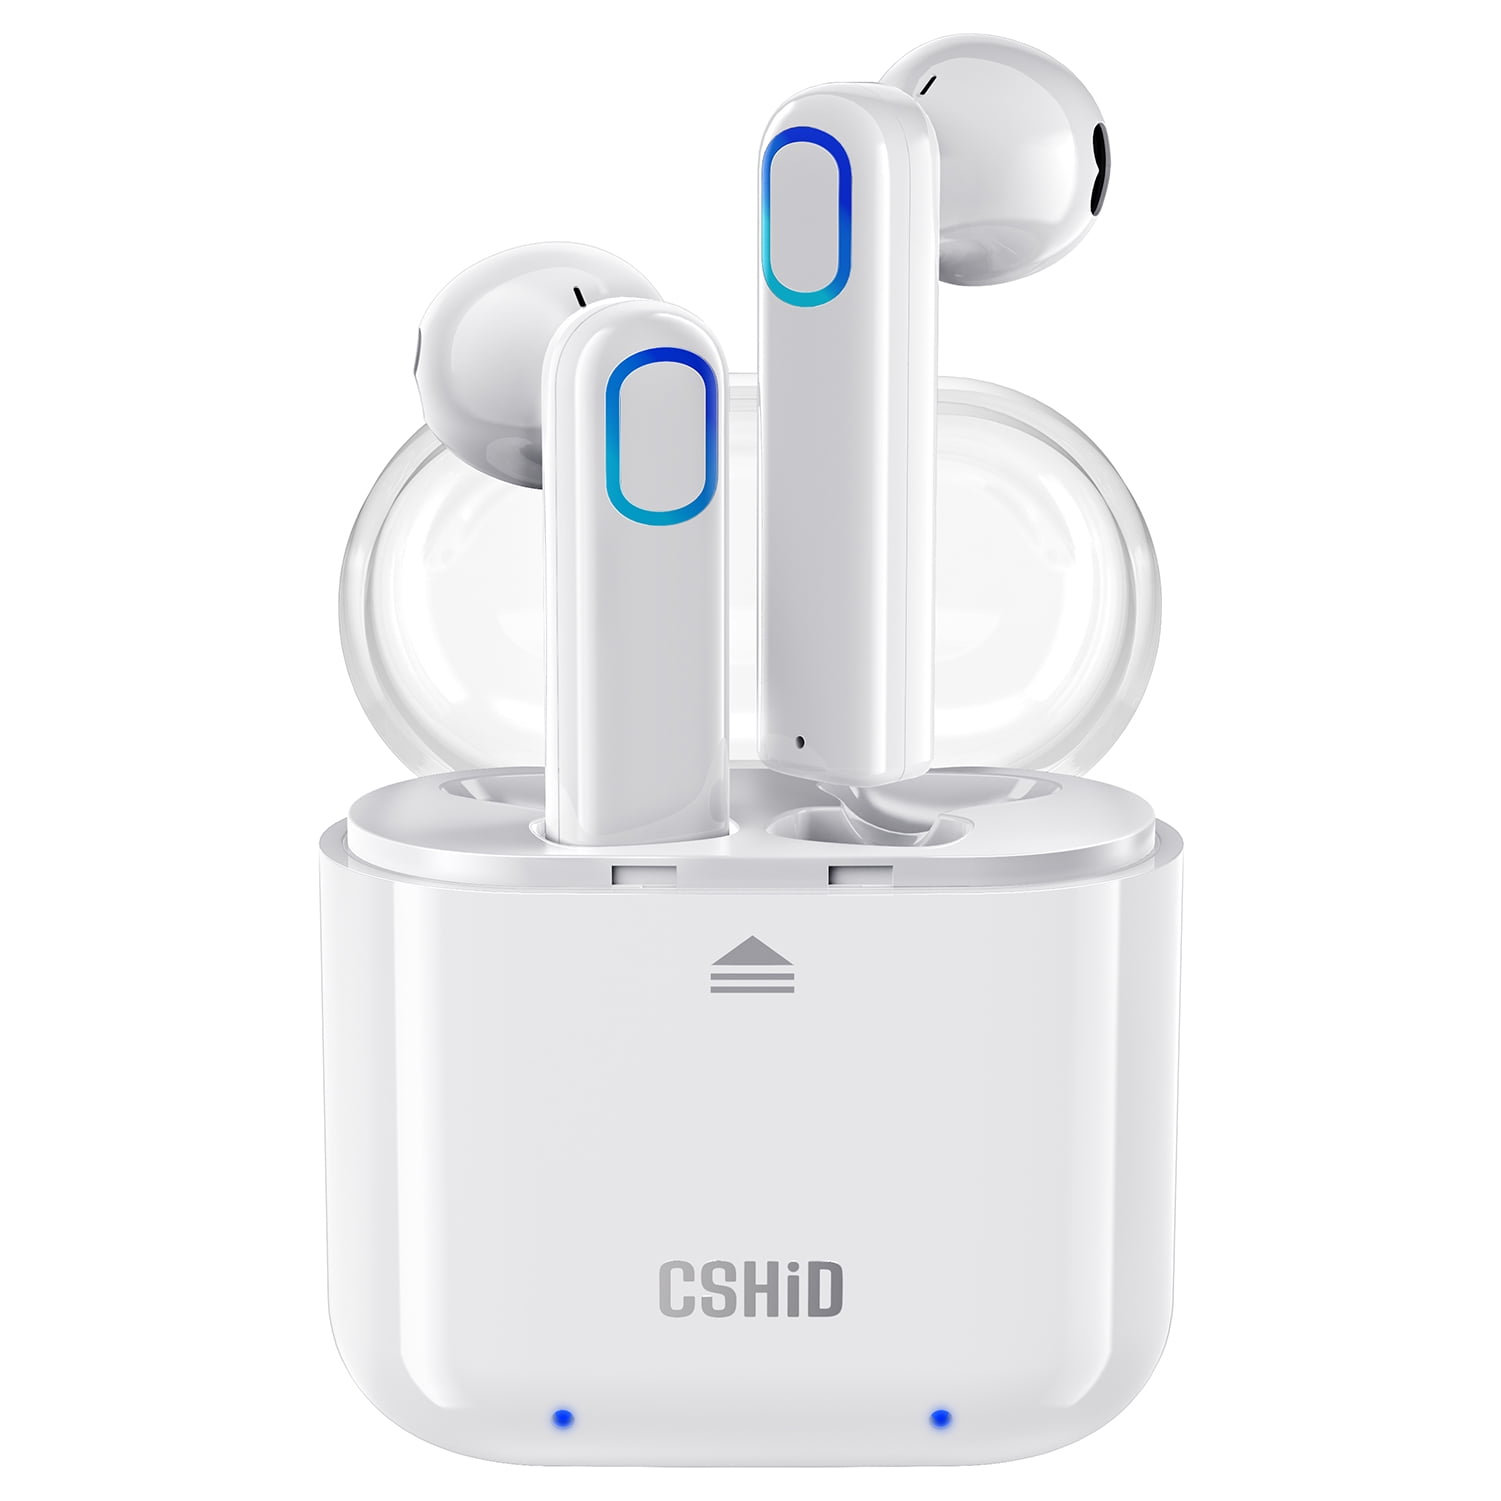 Wireless Earbuds Bluetooth 5.0 Headphones 2020 Latest Intelligent Noise Reduction 【Support Fast Charging】 Pop-ups Auto Pairing iPhone/Android/Samsung/in-Ear Headphones